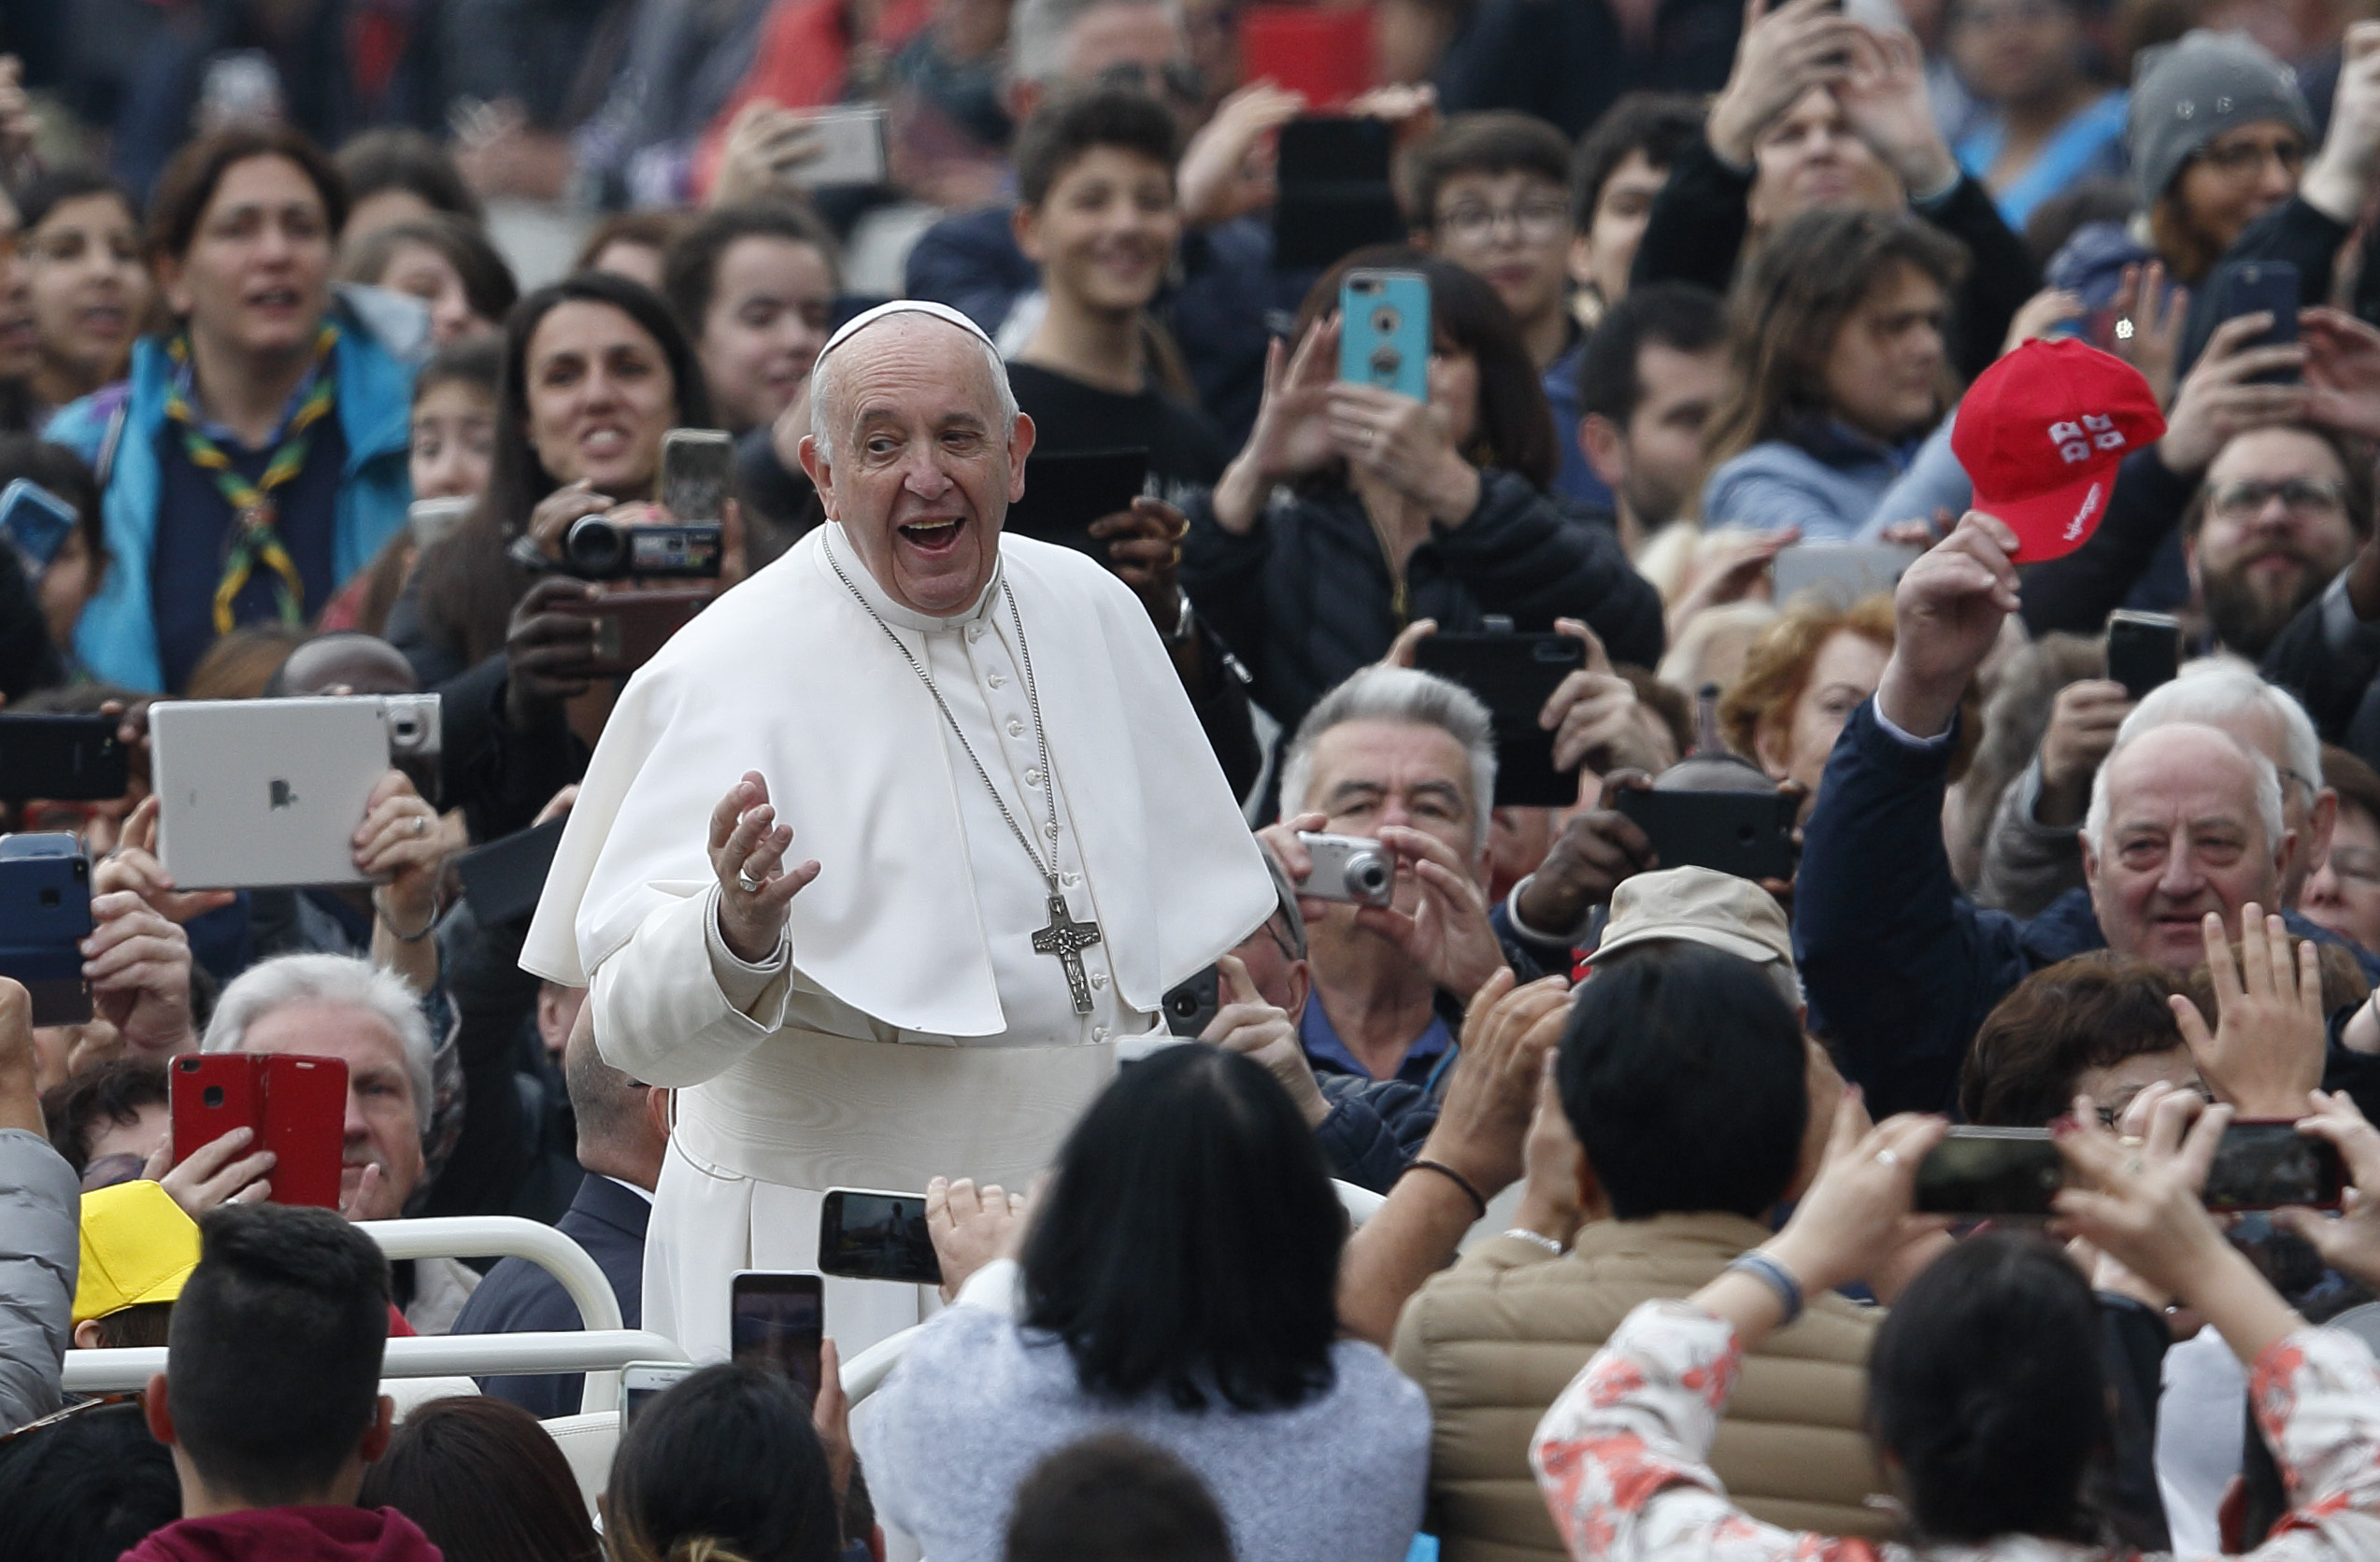 People should not fear difference, but division, pope says at audience